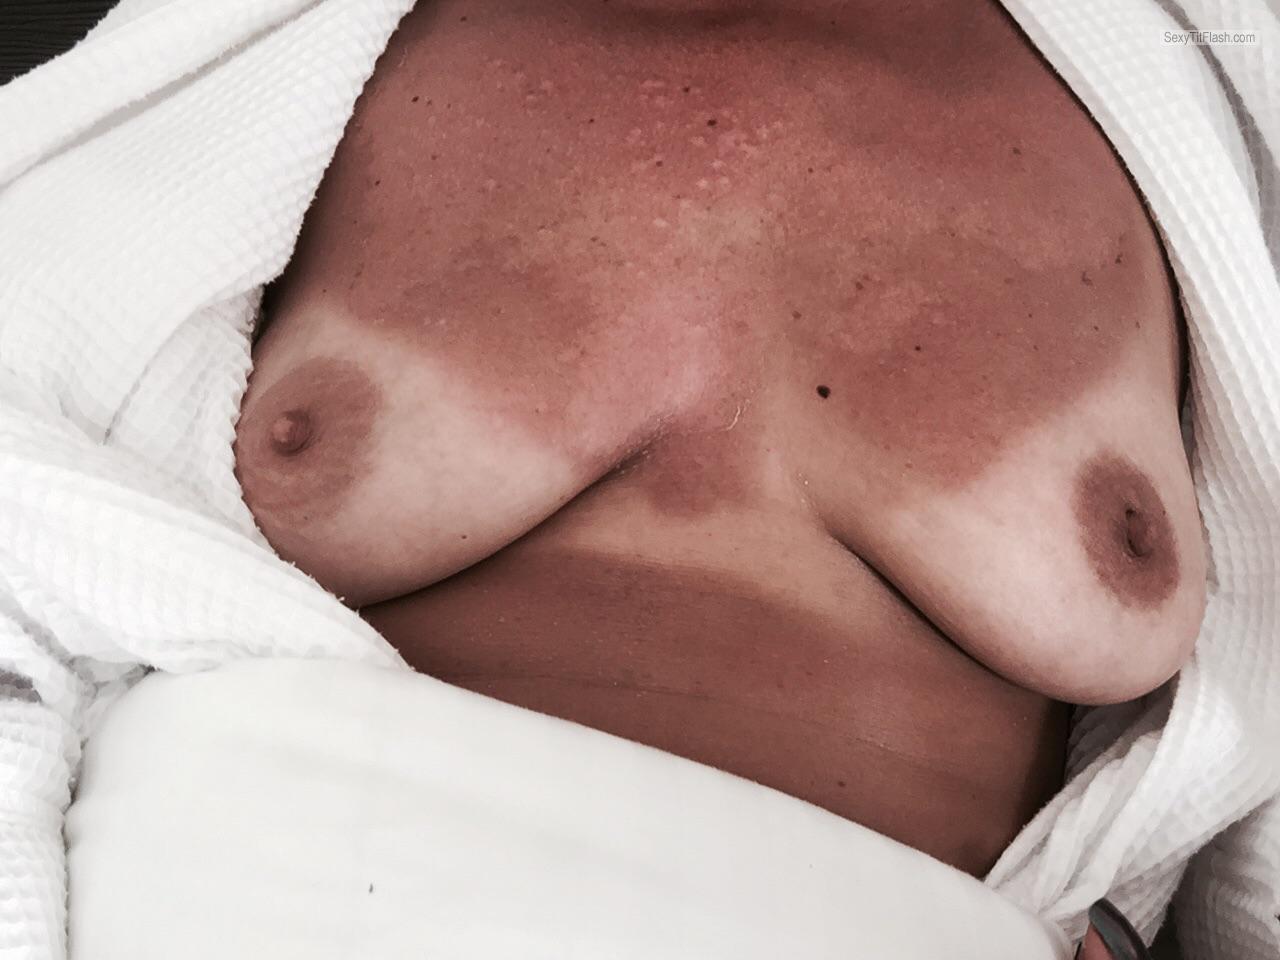 Tit Flash: My Medium Tits With Strong Tanlines - E V from United States